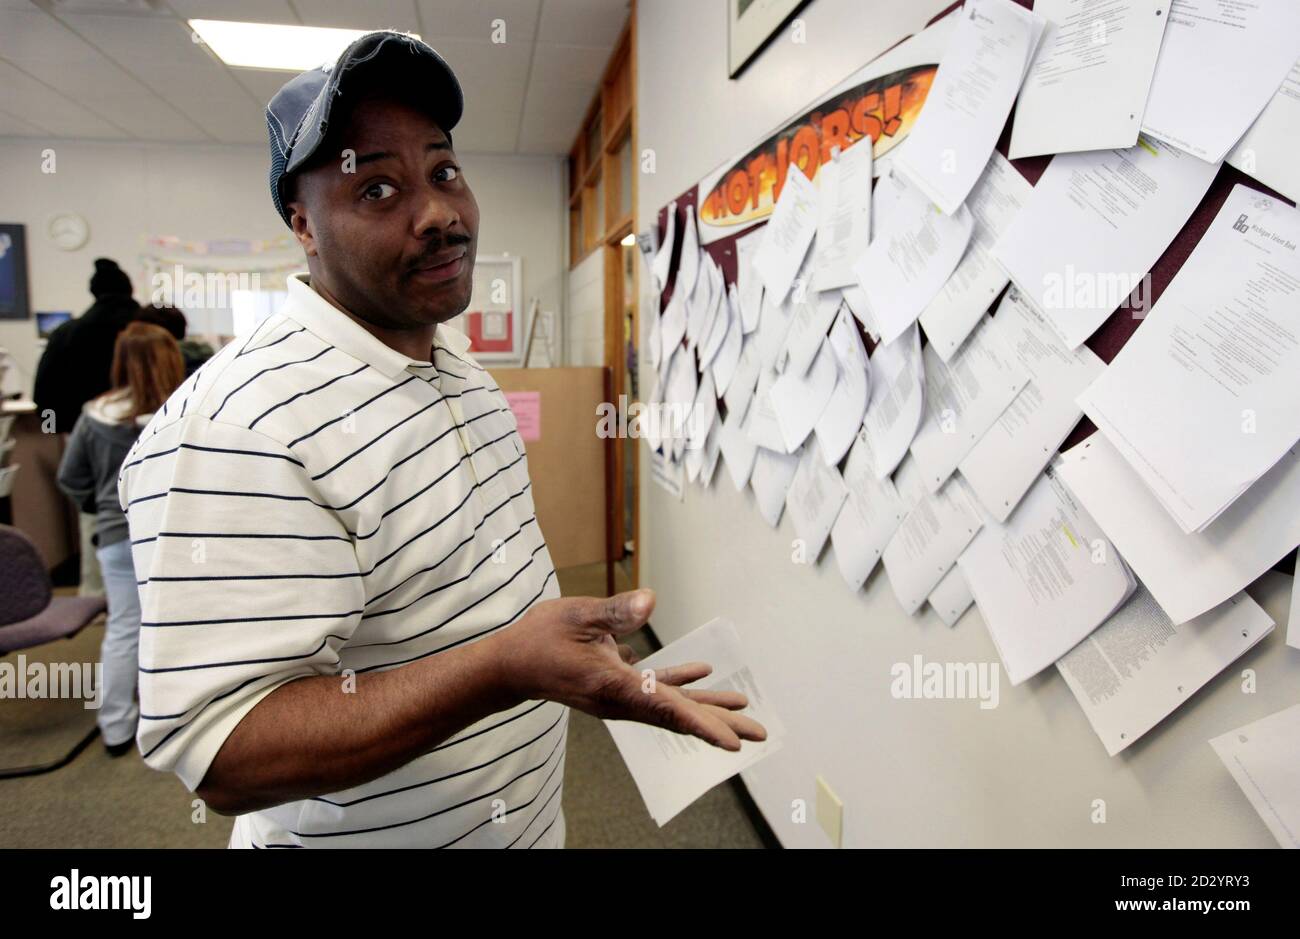 Unemployed truck driver Allen Askew III gestures to the photographer while checking job listings at a jobs search agency in Detroit, Michigan April 3, 2009. The U.S. unemployment rate soared to 8.5% last month, a 25-year high, as employers slashed 663.000 jobs and cut workers' hours to the lowest level on record, the government said on Friday.  REUTERS/Rebecca Cook  (UNITED STATES BUSINESS) Stock Photo